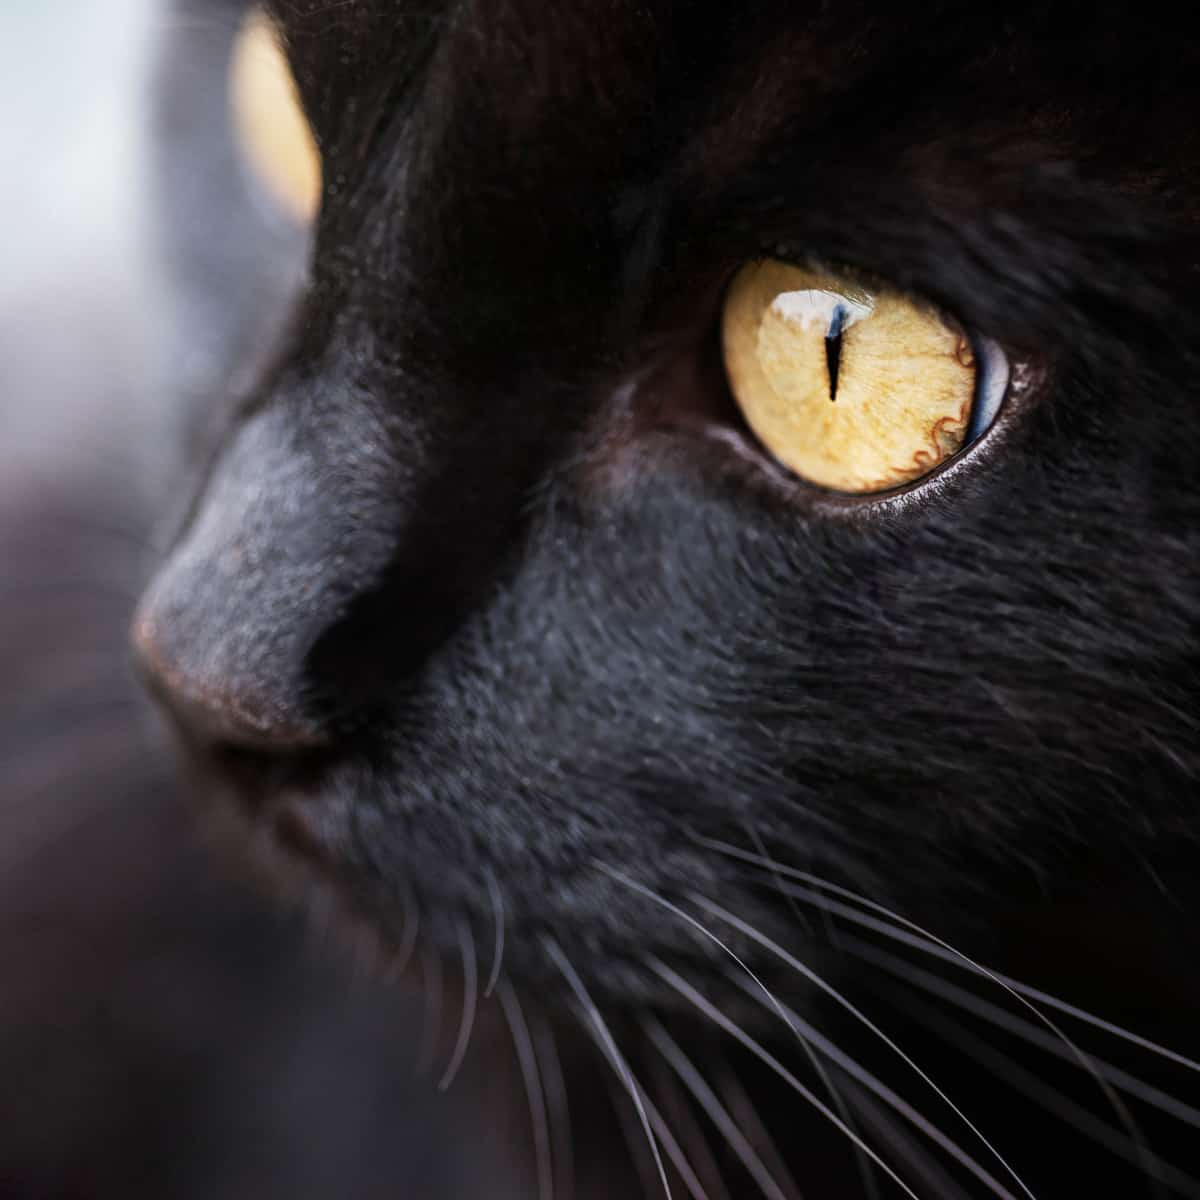 Close-up of cat's eyes and nose.